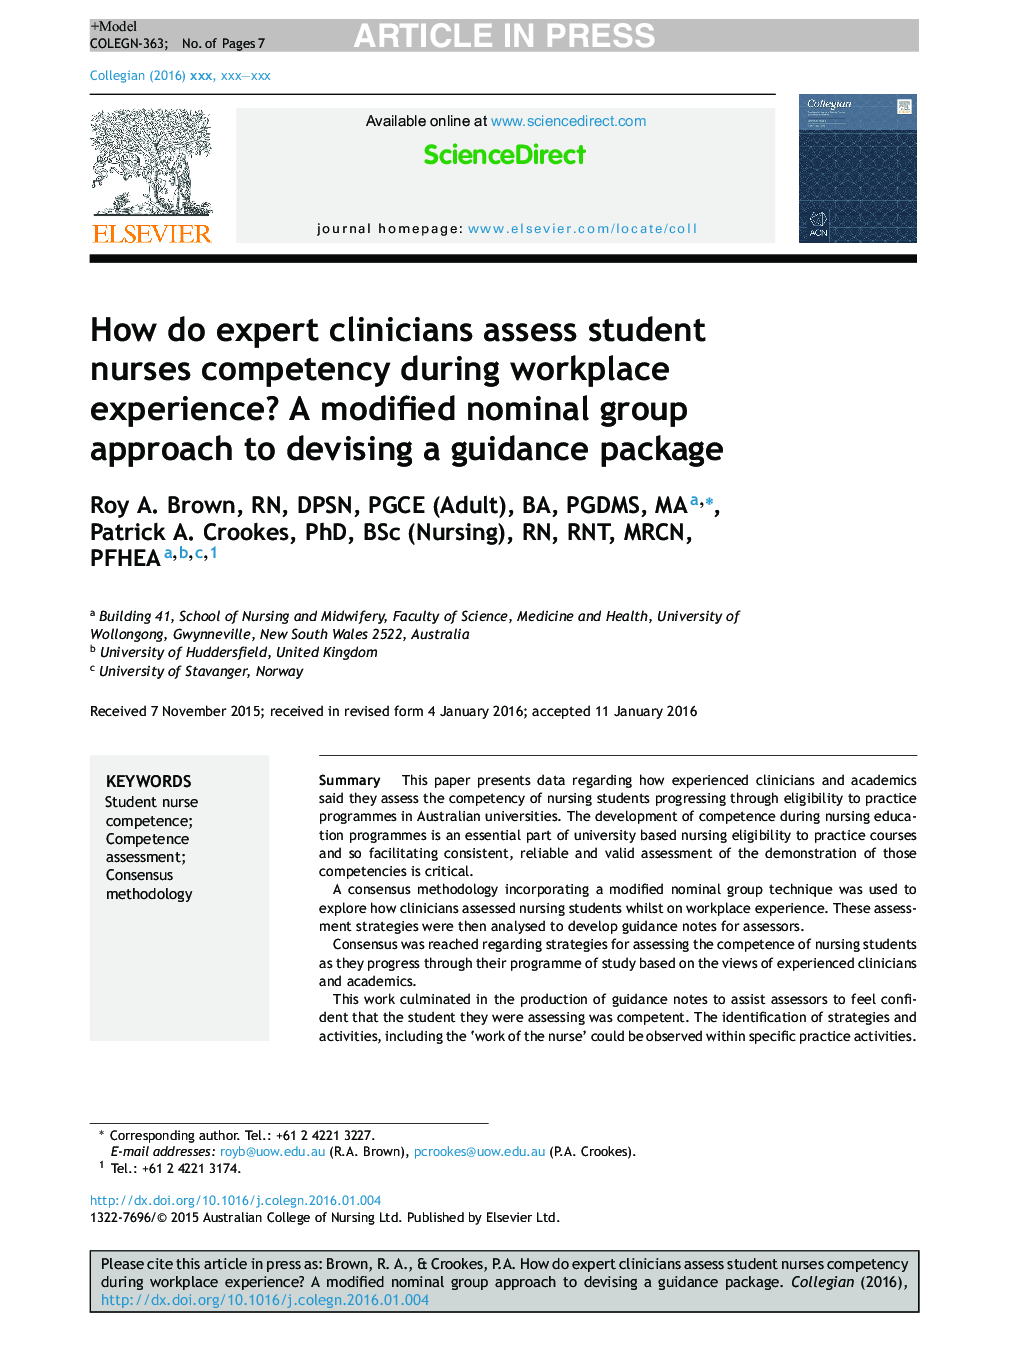 How do expert clinicians assess student nurses competency during workplace experience? A modified nominal group approach to devising a guidance package